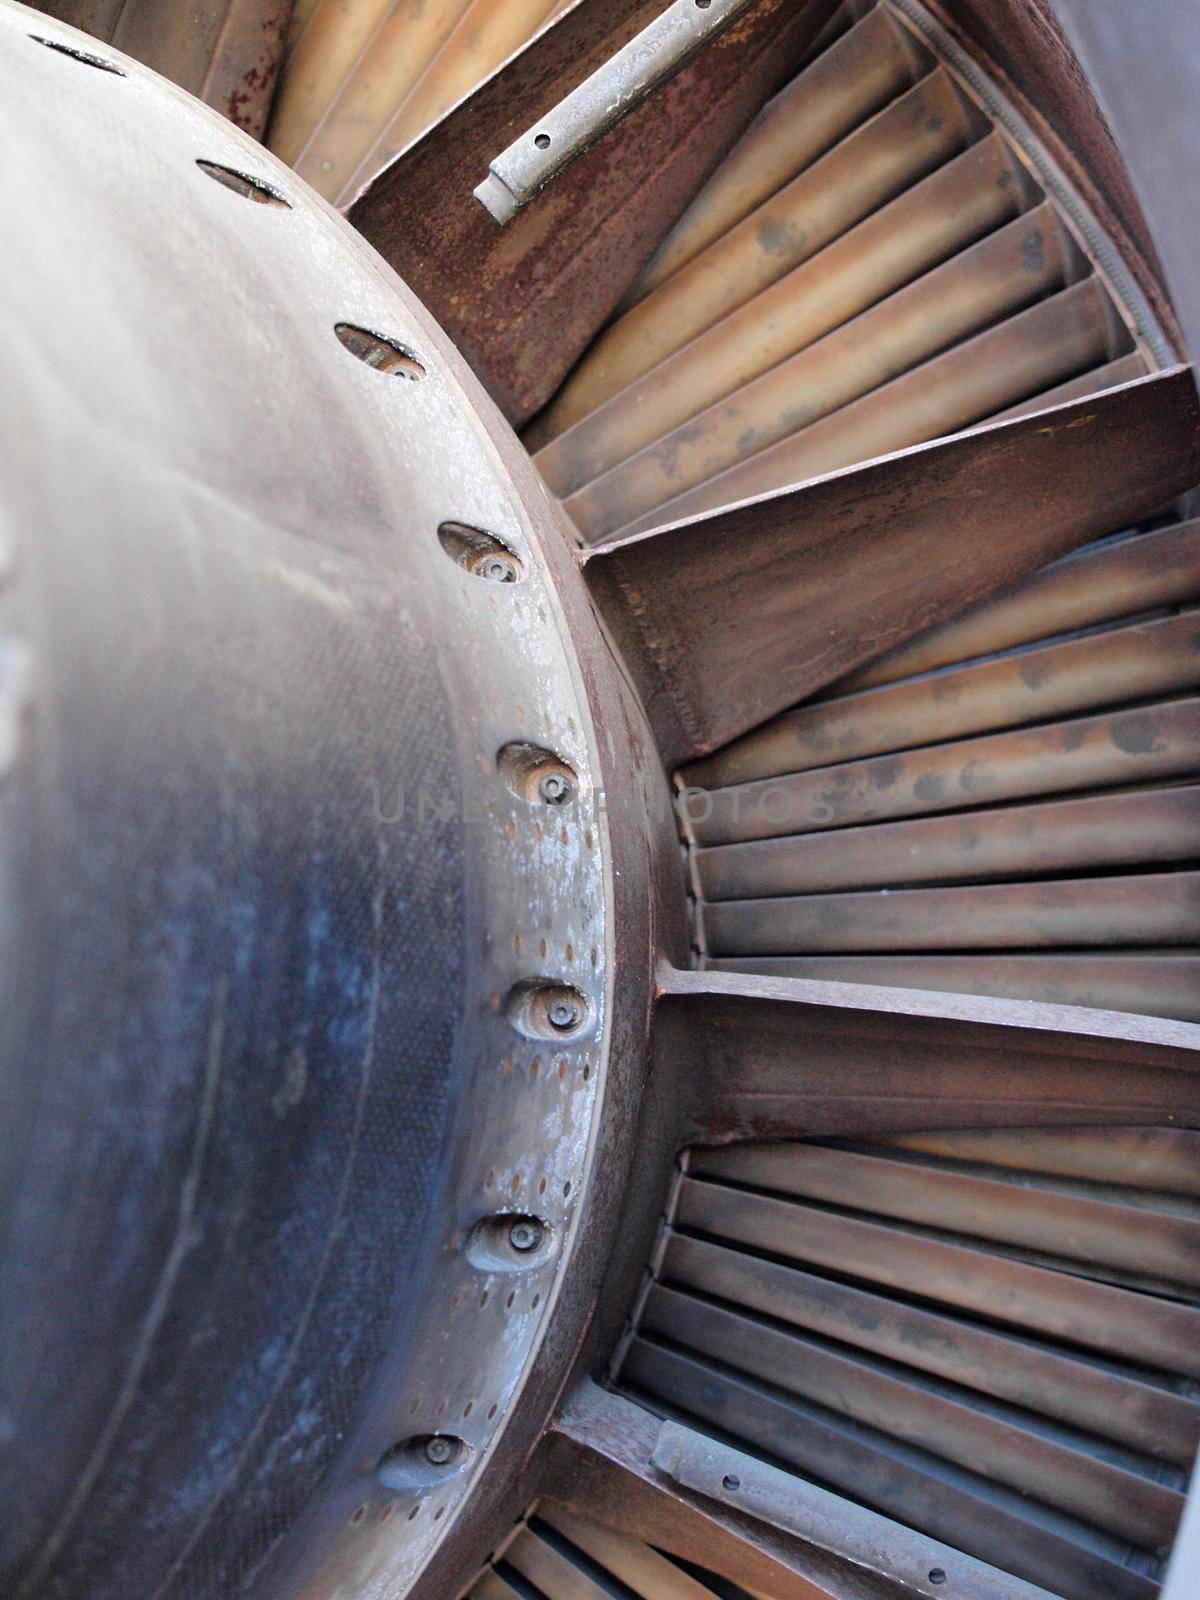 Close up of turbine and fan blades of a jet engine with signs of wear. by EricGBVD